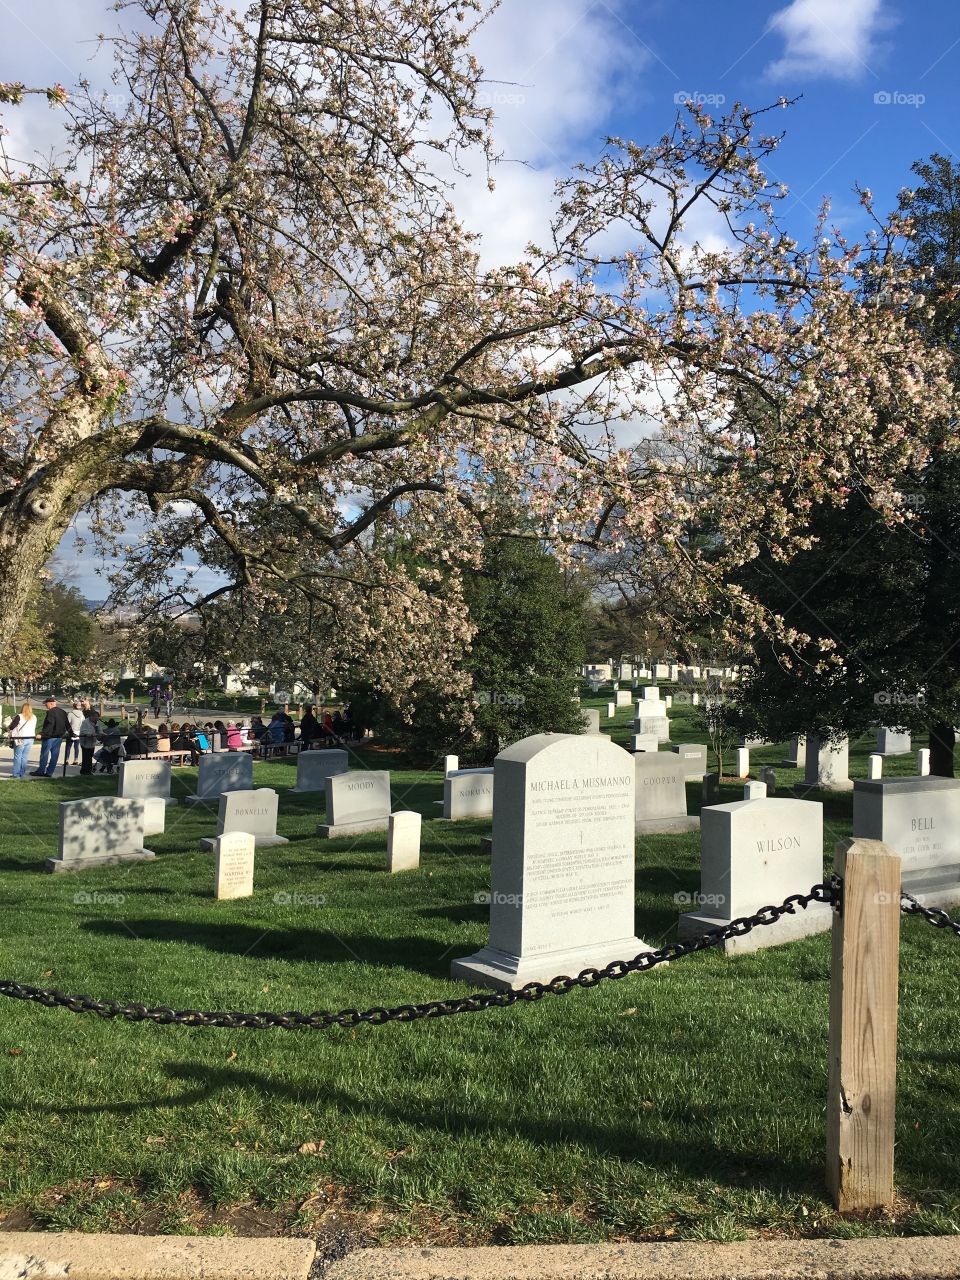 The gorgeous view of well appreciated veterans at Arlington cemetery 